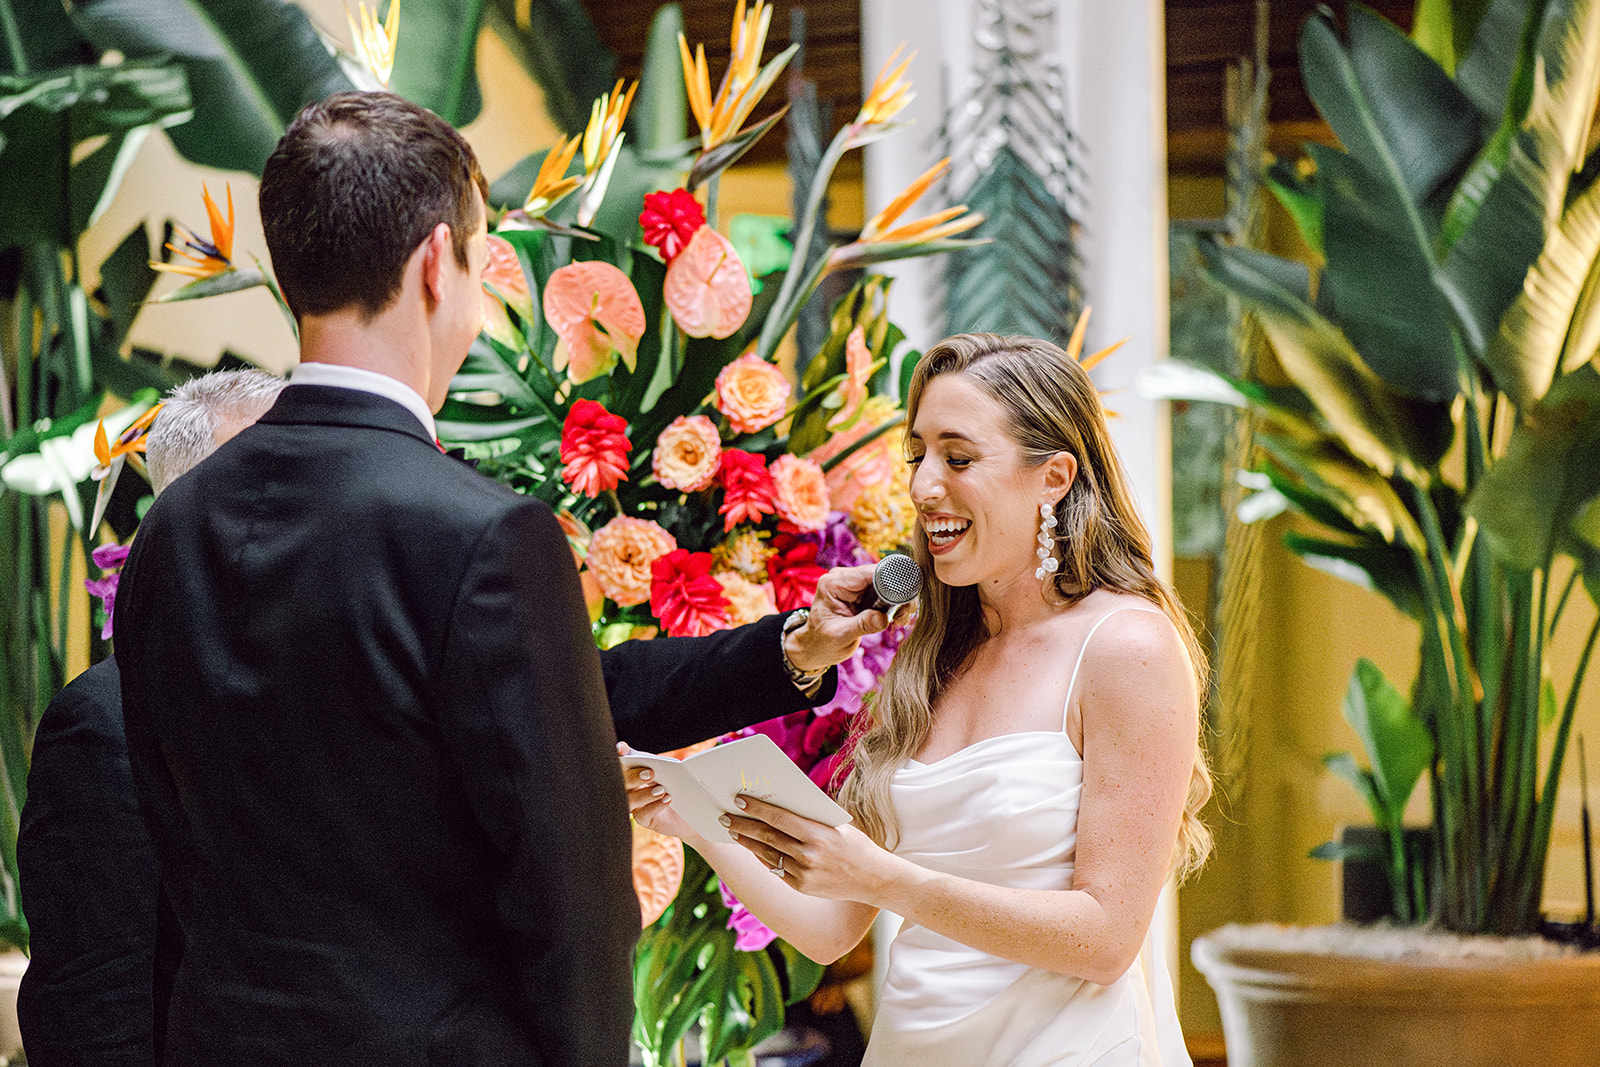 Bride smiling and reading vows to groom at during ceremony at Mayfair House Hotel & Garden in Miami on wedding day.